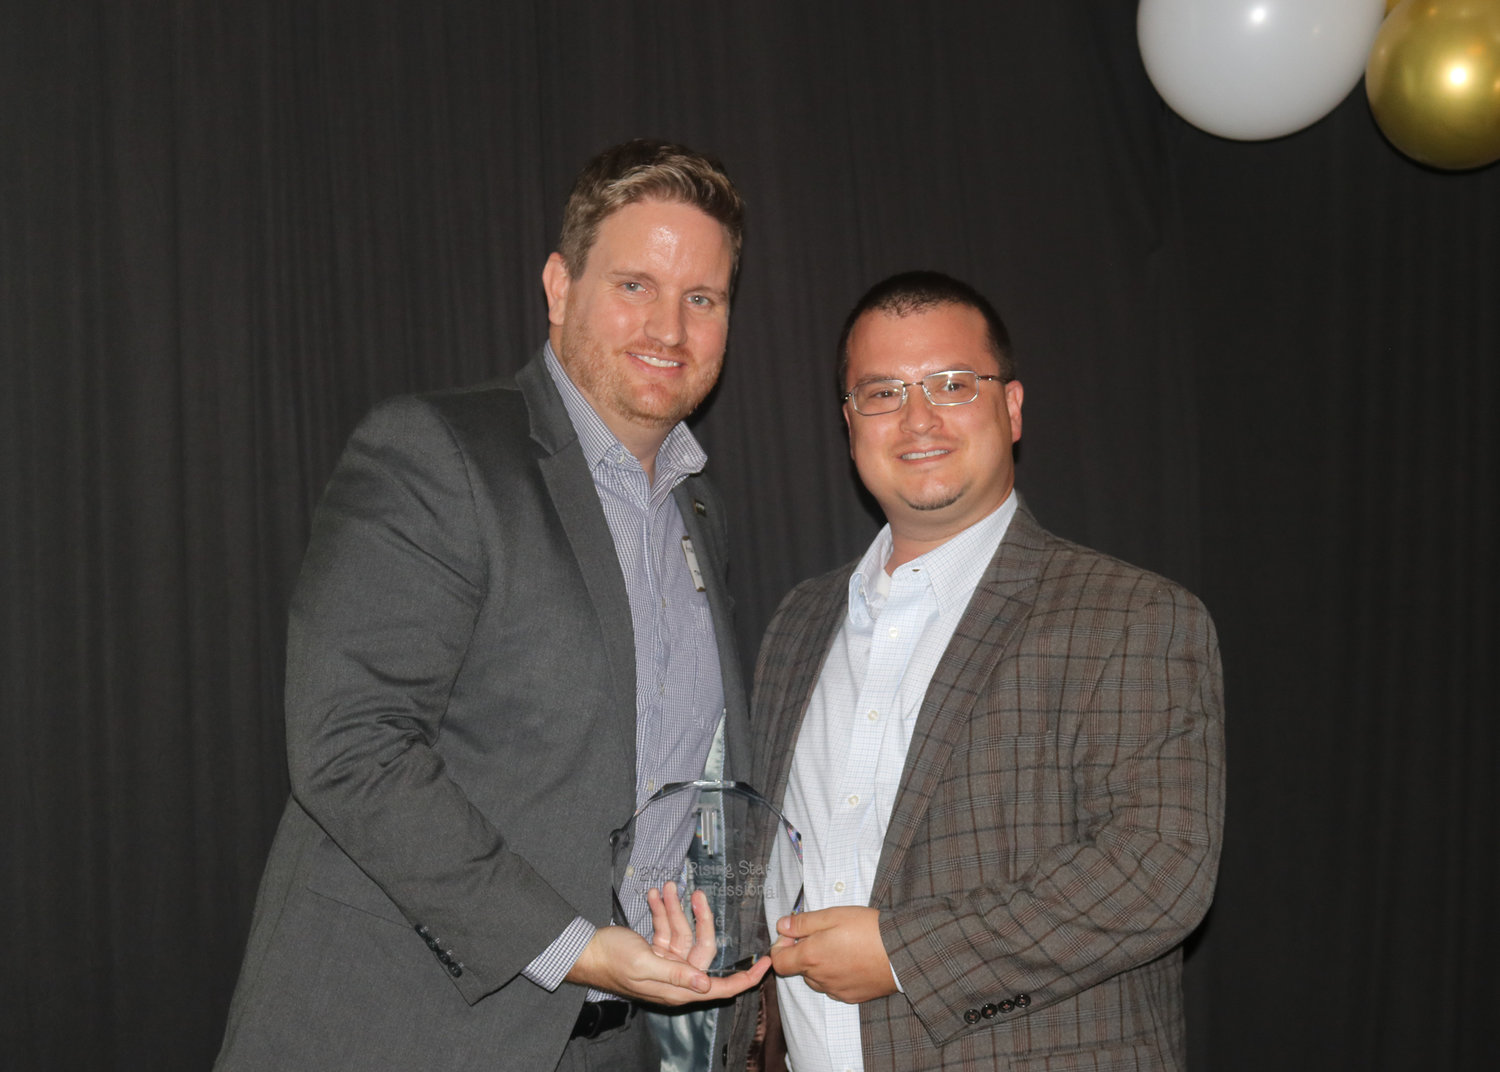 Kyle Brown, left, was named the Rising Star/Young Professional of the Year. He is pictured with Jim Johnson.